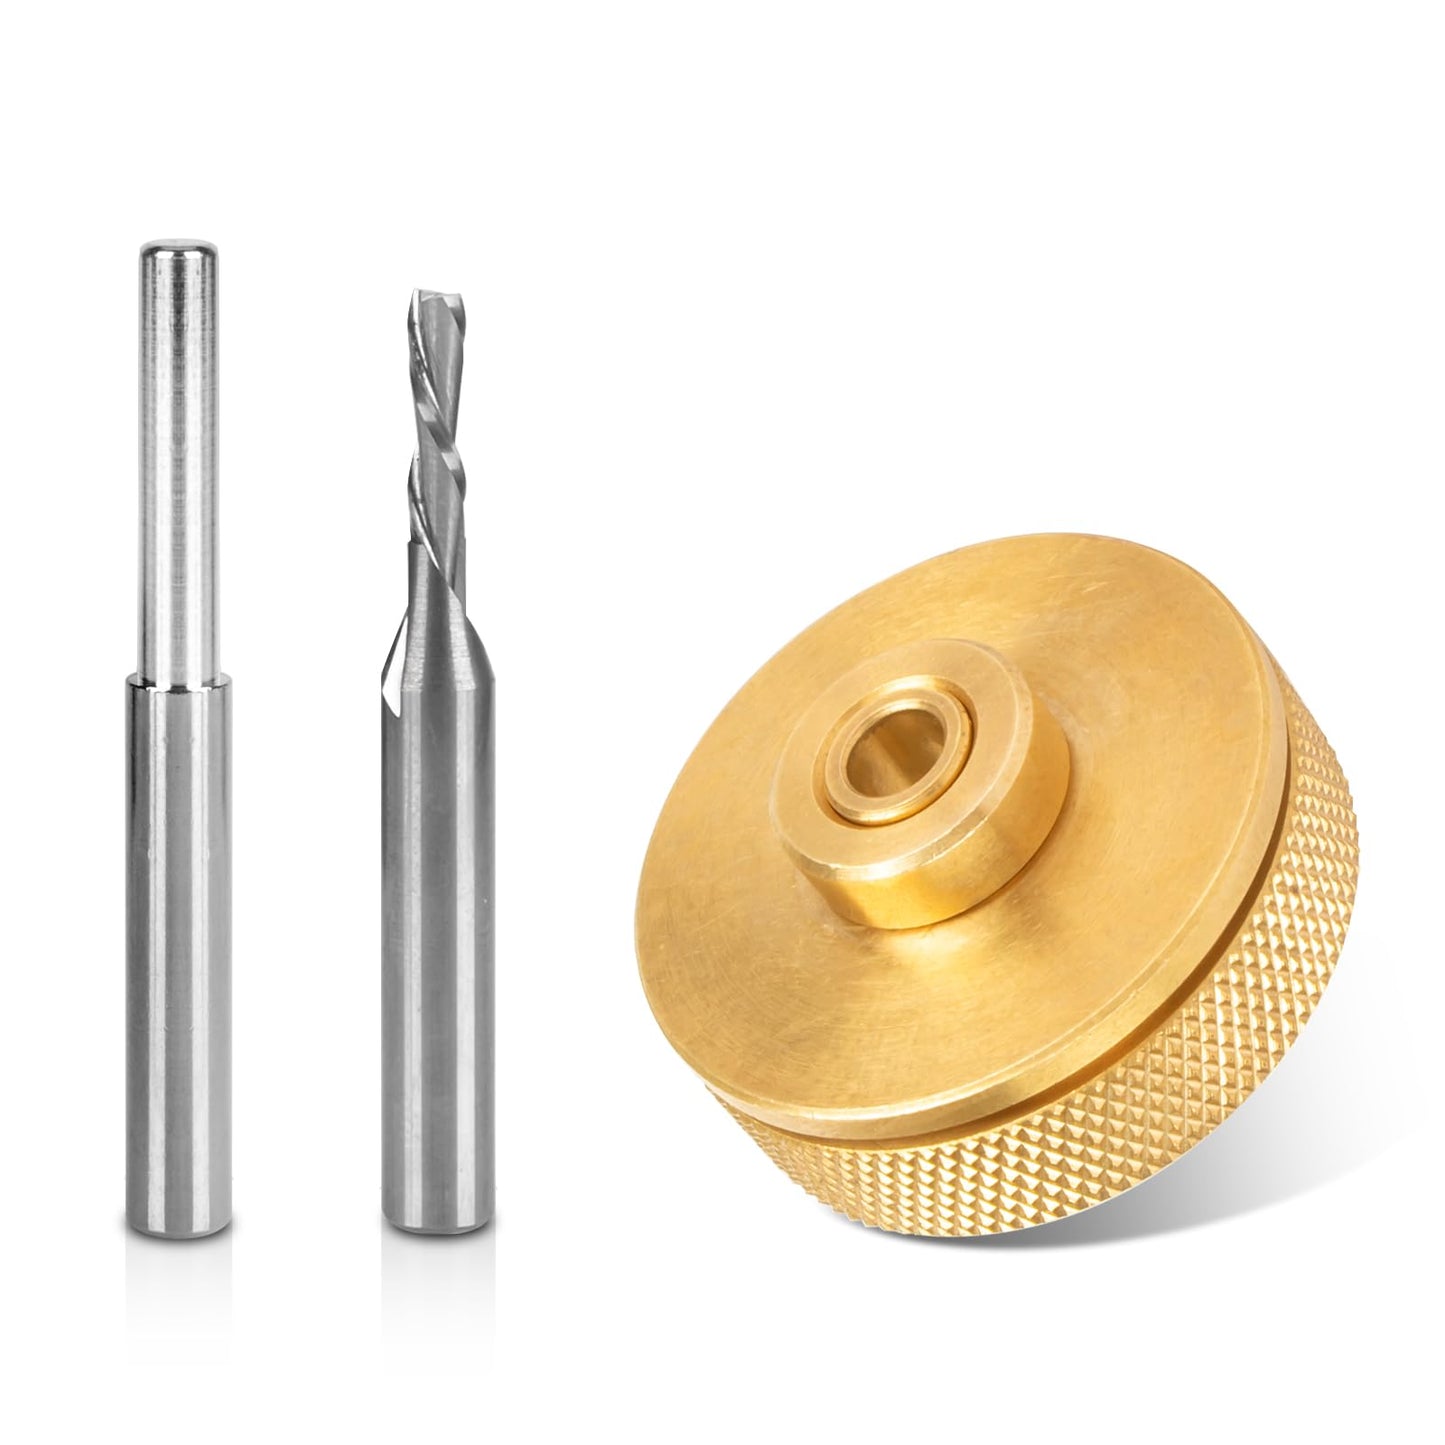 71333 Solid Brass Router Inlay Set for 1/4 Templates High RPM Routing, Includes 1/8" Carbide Spiral Bit + 1/4 Shank, Universal Quick Change Bushing,